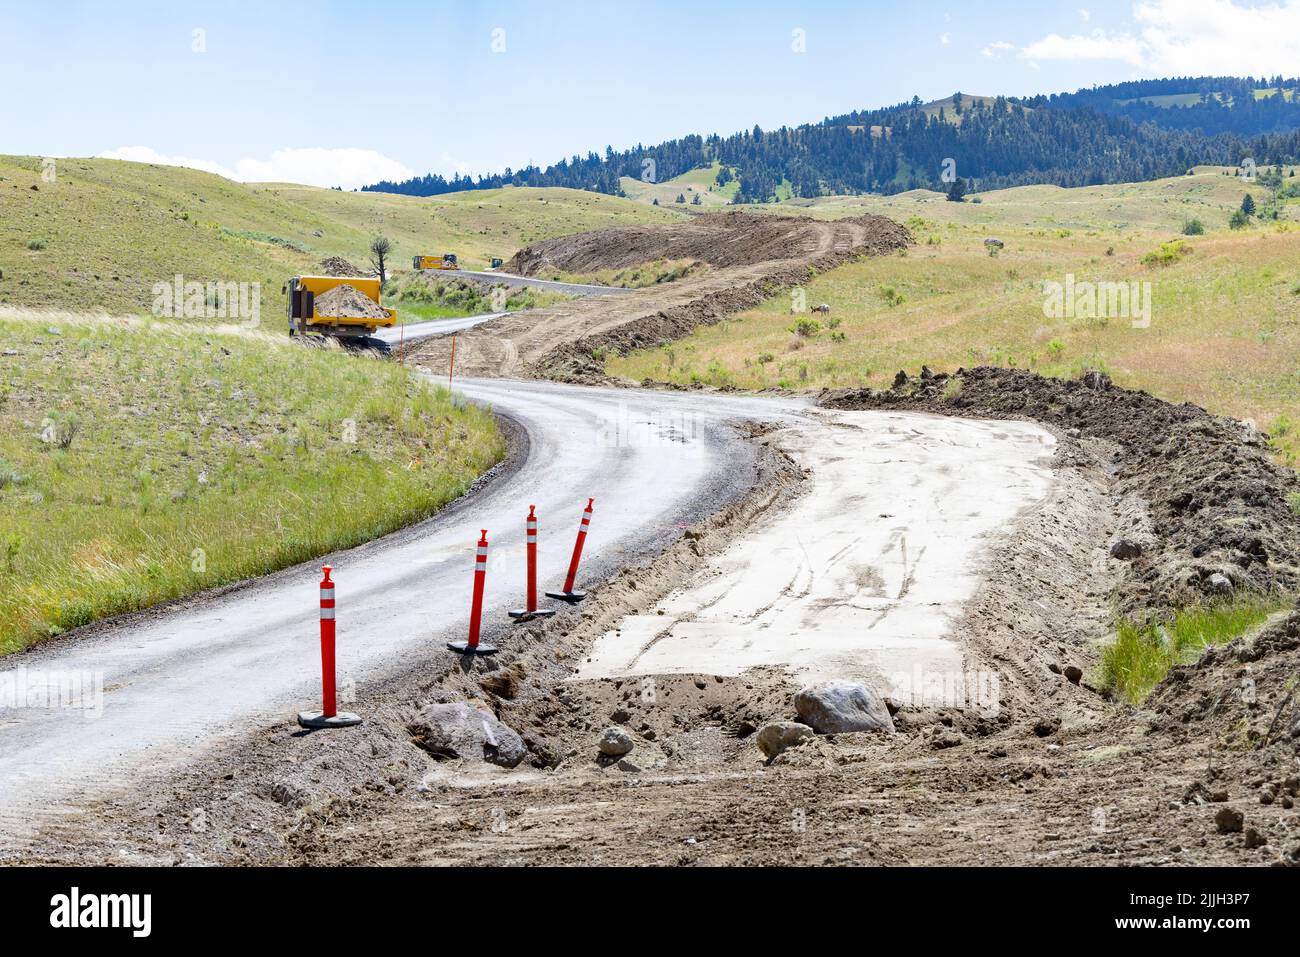 Mammoth Hot Springs, United States of America. 20 July, 2022. National Park Service workers improve sections of the Old Gardiner Road at the North Entrance of Yellowstone National Park, July 20, 2022 in Mammoth Hot Springs, Montana. The old dirt road will now allow visitors to enter the park after the main roads were destroyed in flooding cutting off the northern entrance and the tourist town of Gardiner.  Credit: Jacob W. Frank/NPS/Alamy Live News Stock Photo